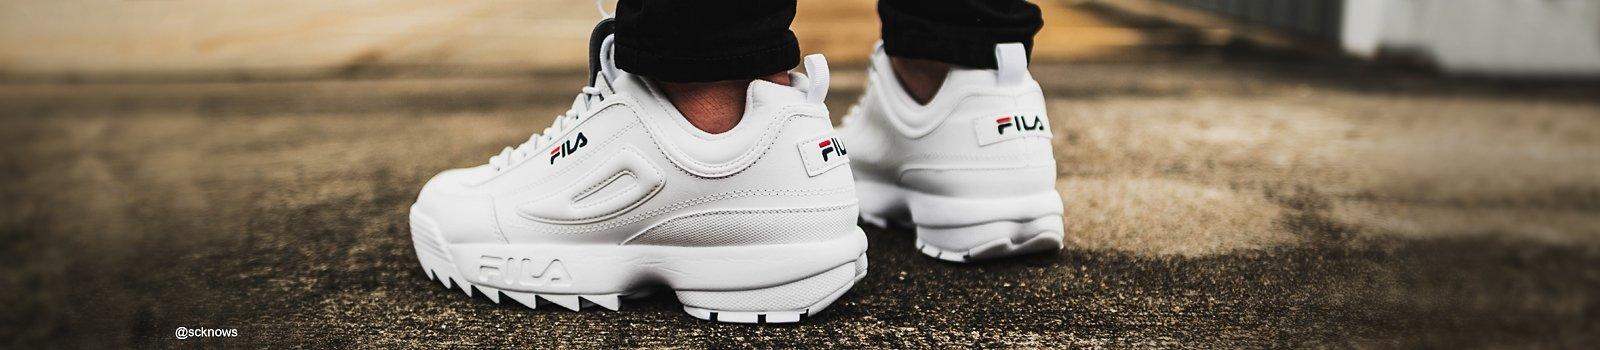 Fila Shoes, Clothing & Accessories |